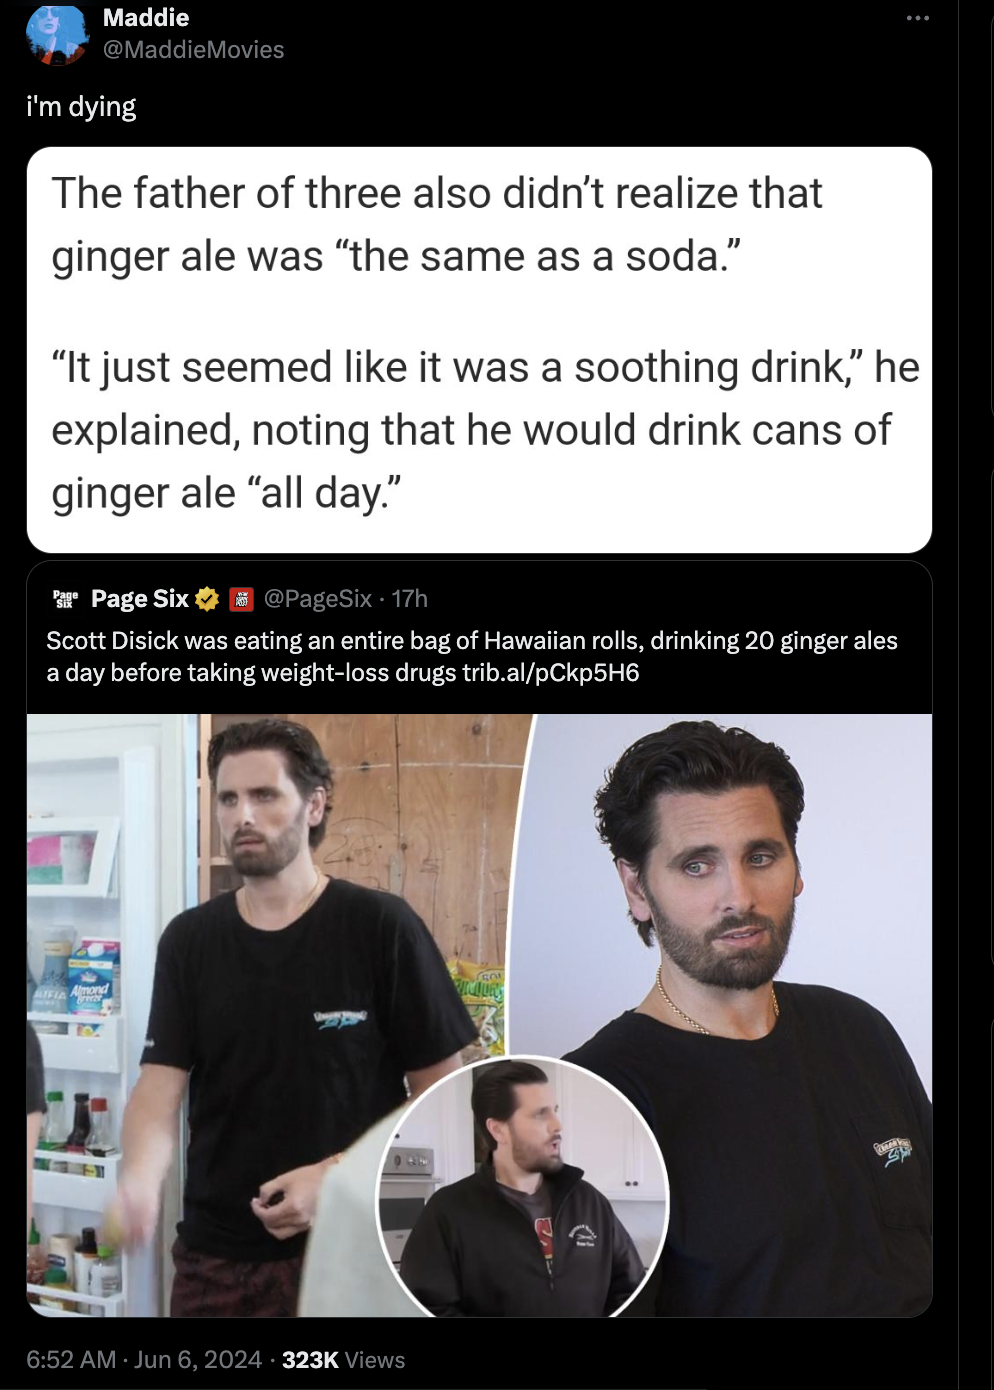 screenshot - Maddie MaddieMovies I'm dying The father of three also didn't realize that ginger ale was "the same as a soda." "It just seemed it was a soothing drink," he explained, noting that he would drink cans of ginger ale "all day." Page Six PageSix1